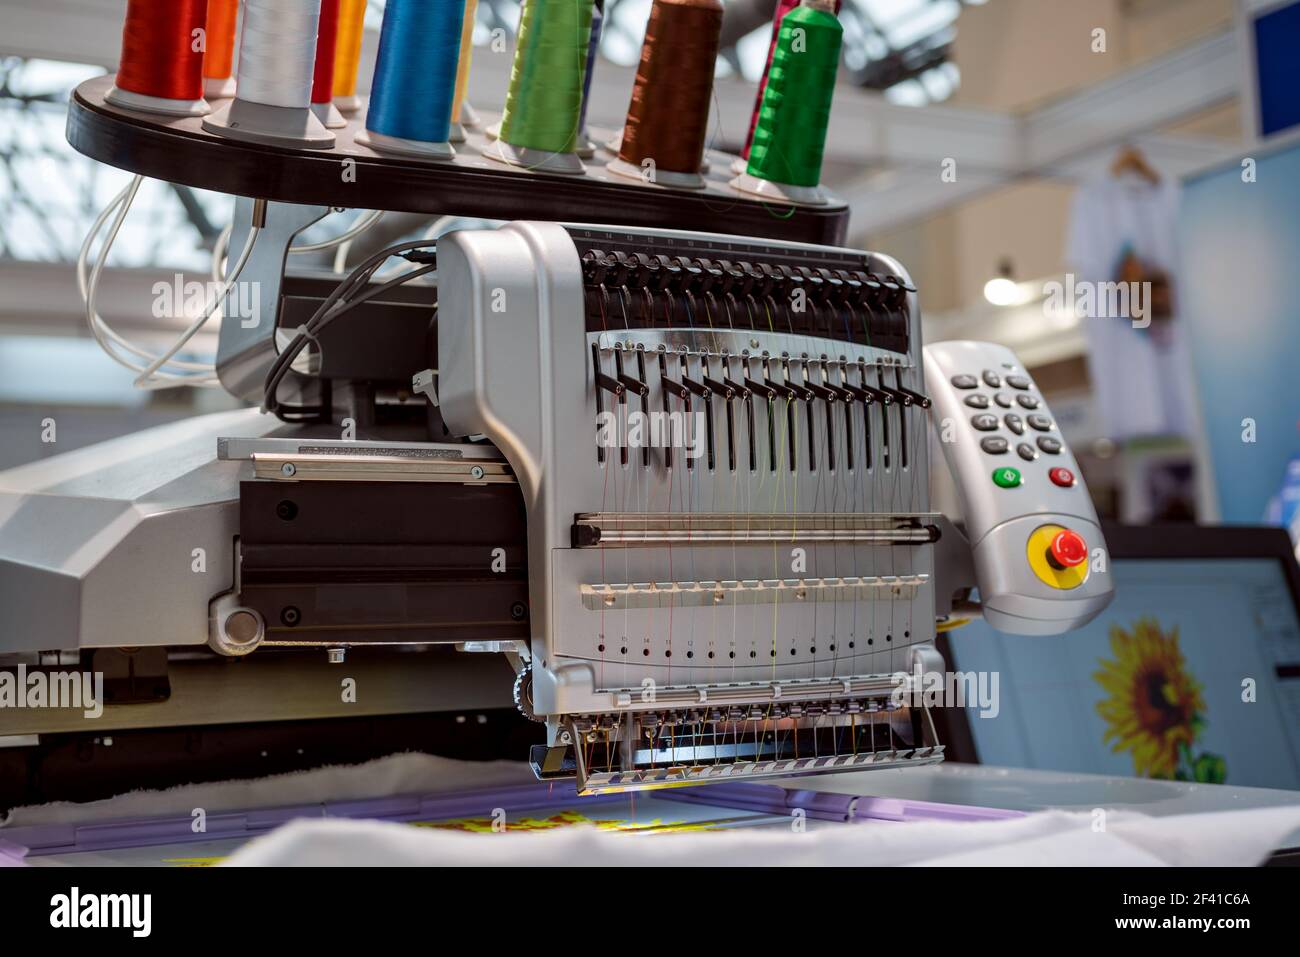 Automatic industrial sewing machine for stitch by digital pattern. Modern textile industry. Stock Photo